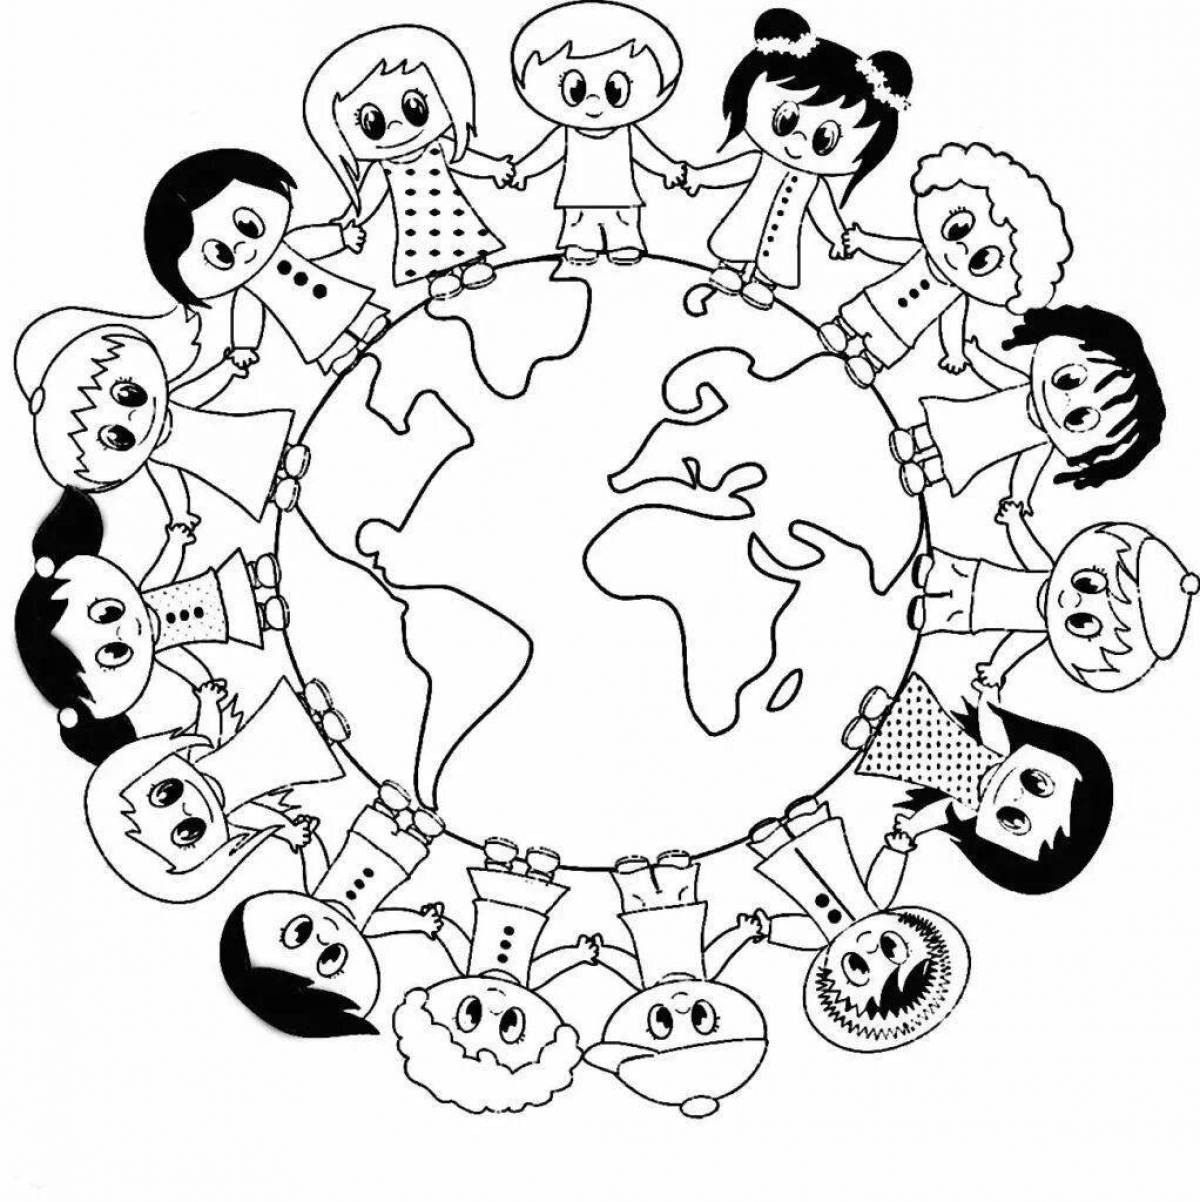 Adorable friendship coloring page